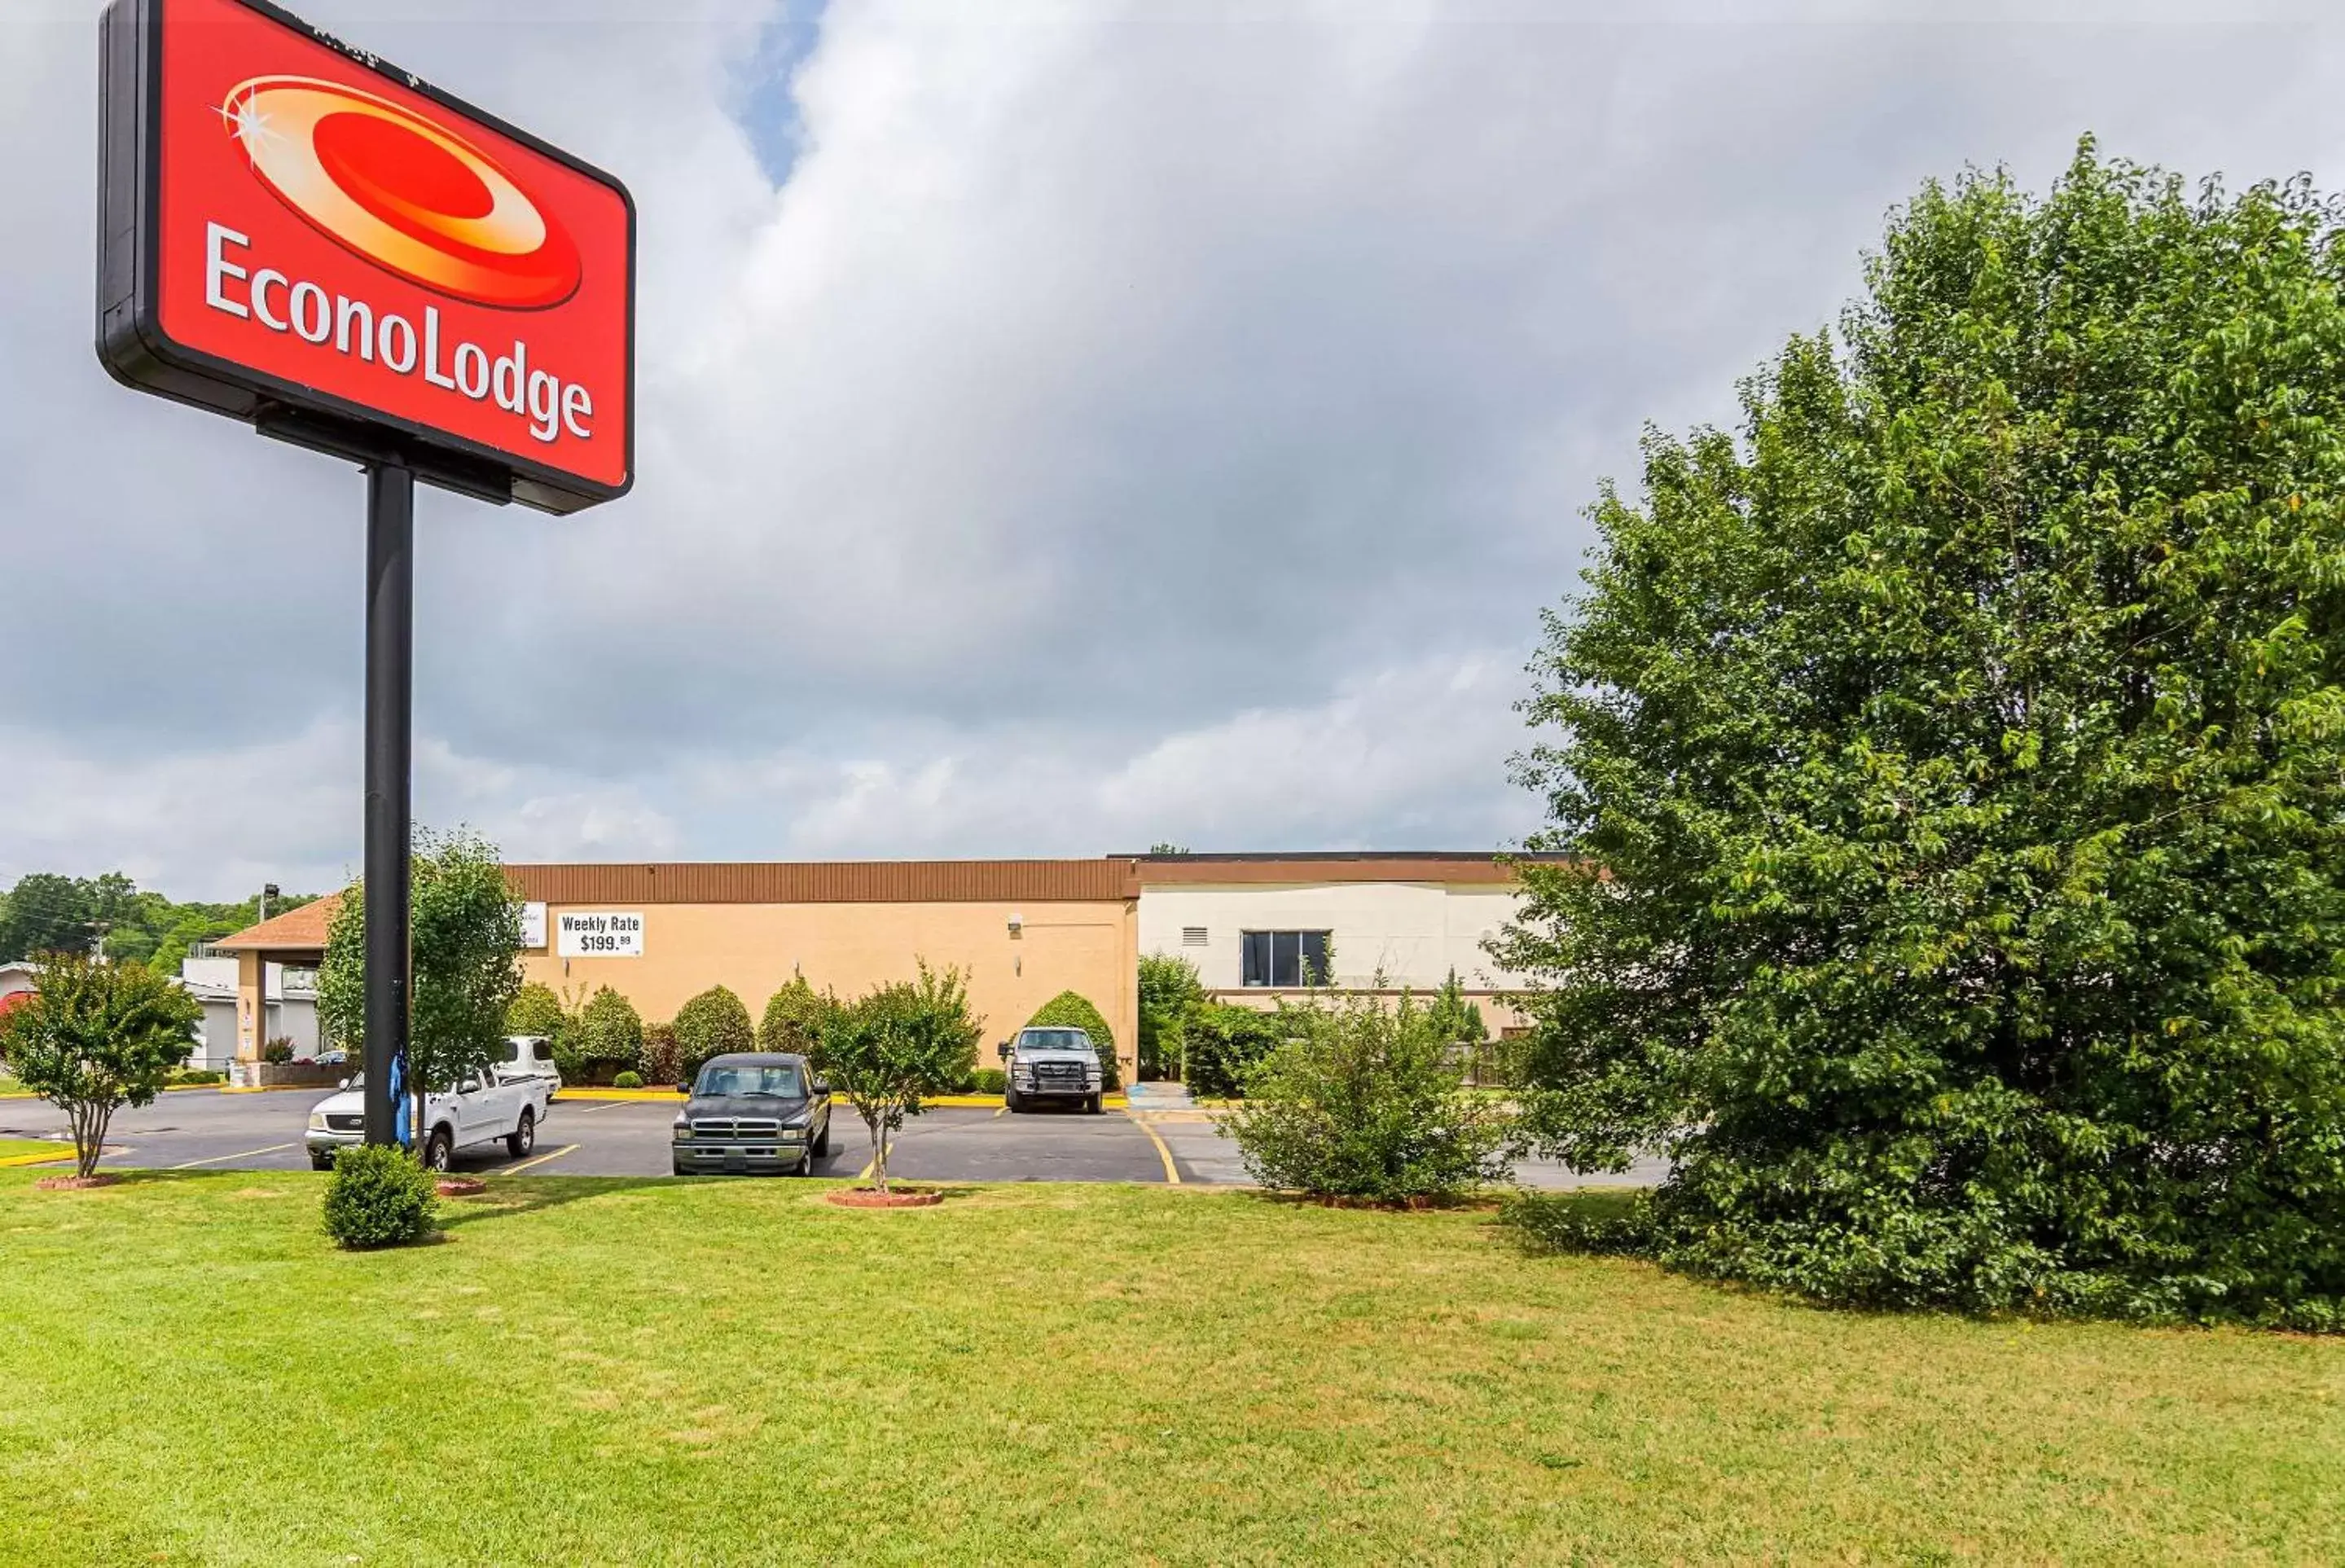 Property building in Econo Lodge Jacksonville near Little Rock Air Force Base